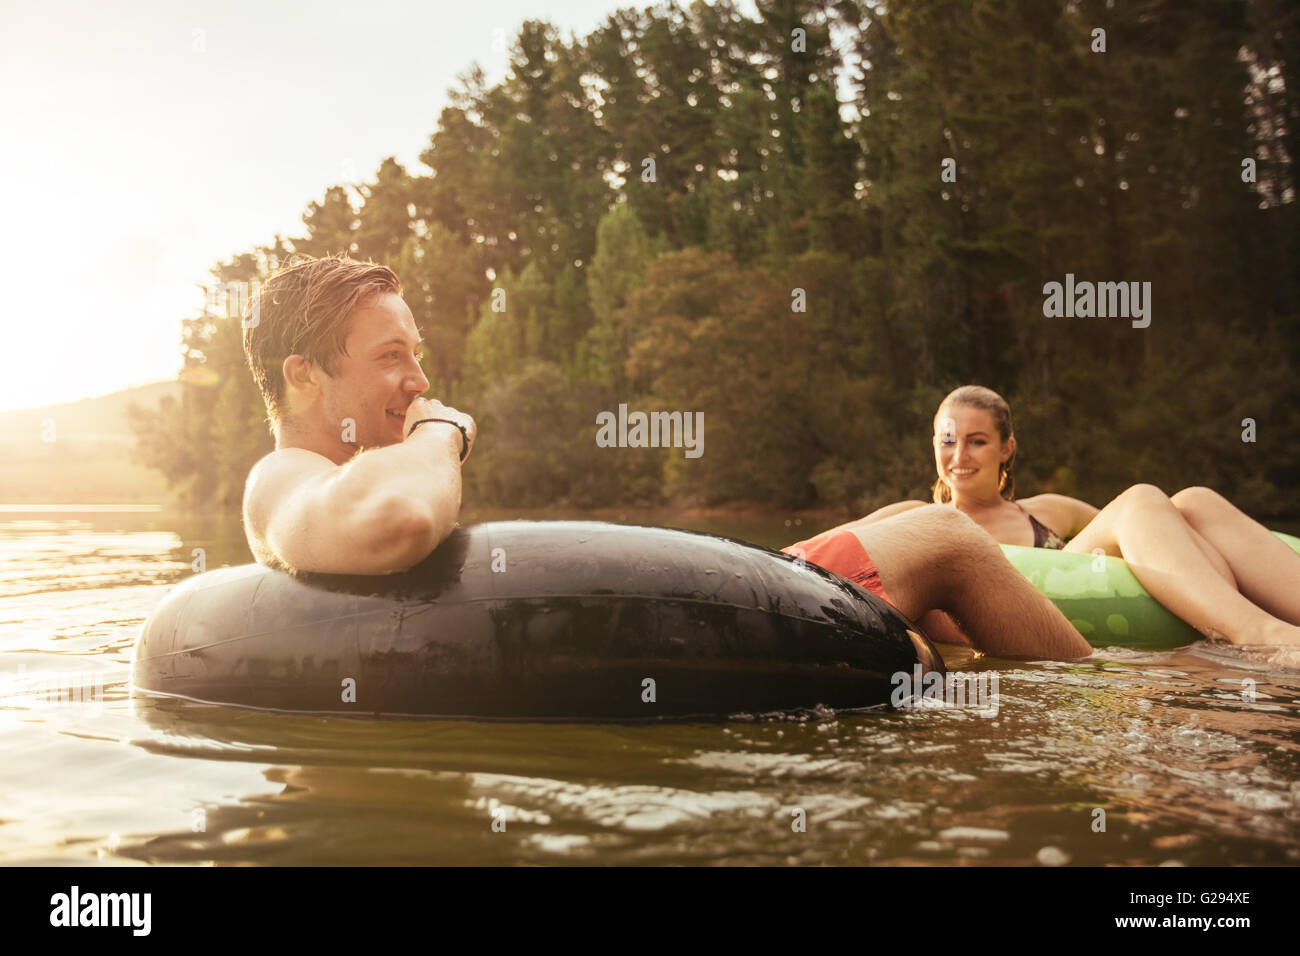 Portrait of happy young man in lake on inflatable ring with his girlfriend. Young couple relaxing in water on a summer day. Stock Photo